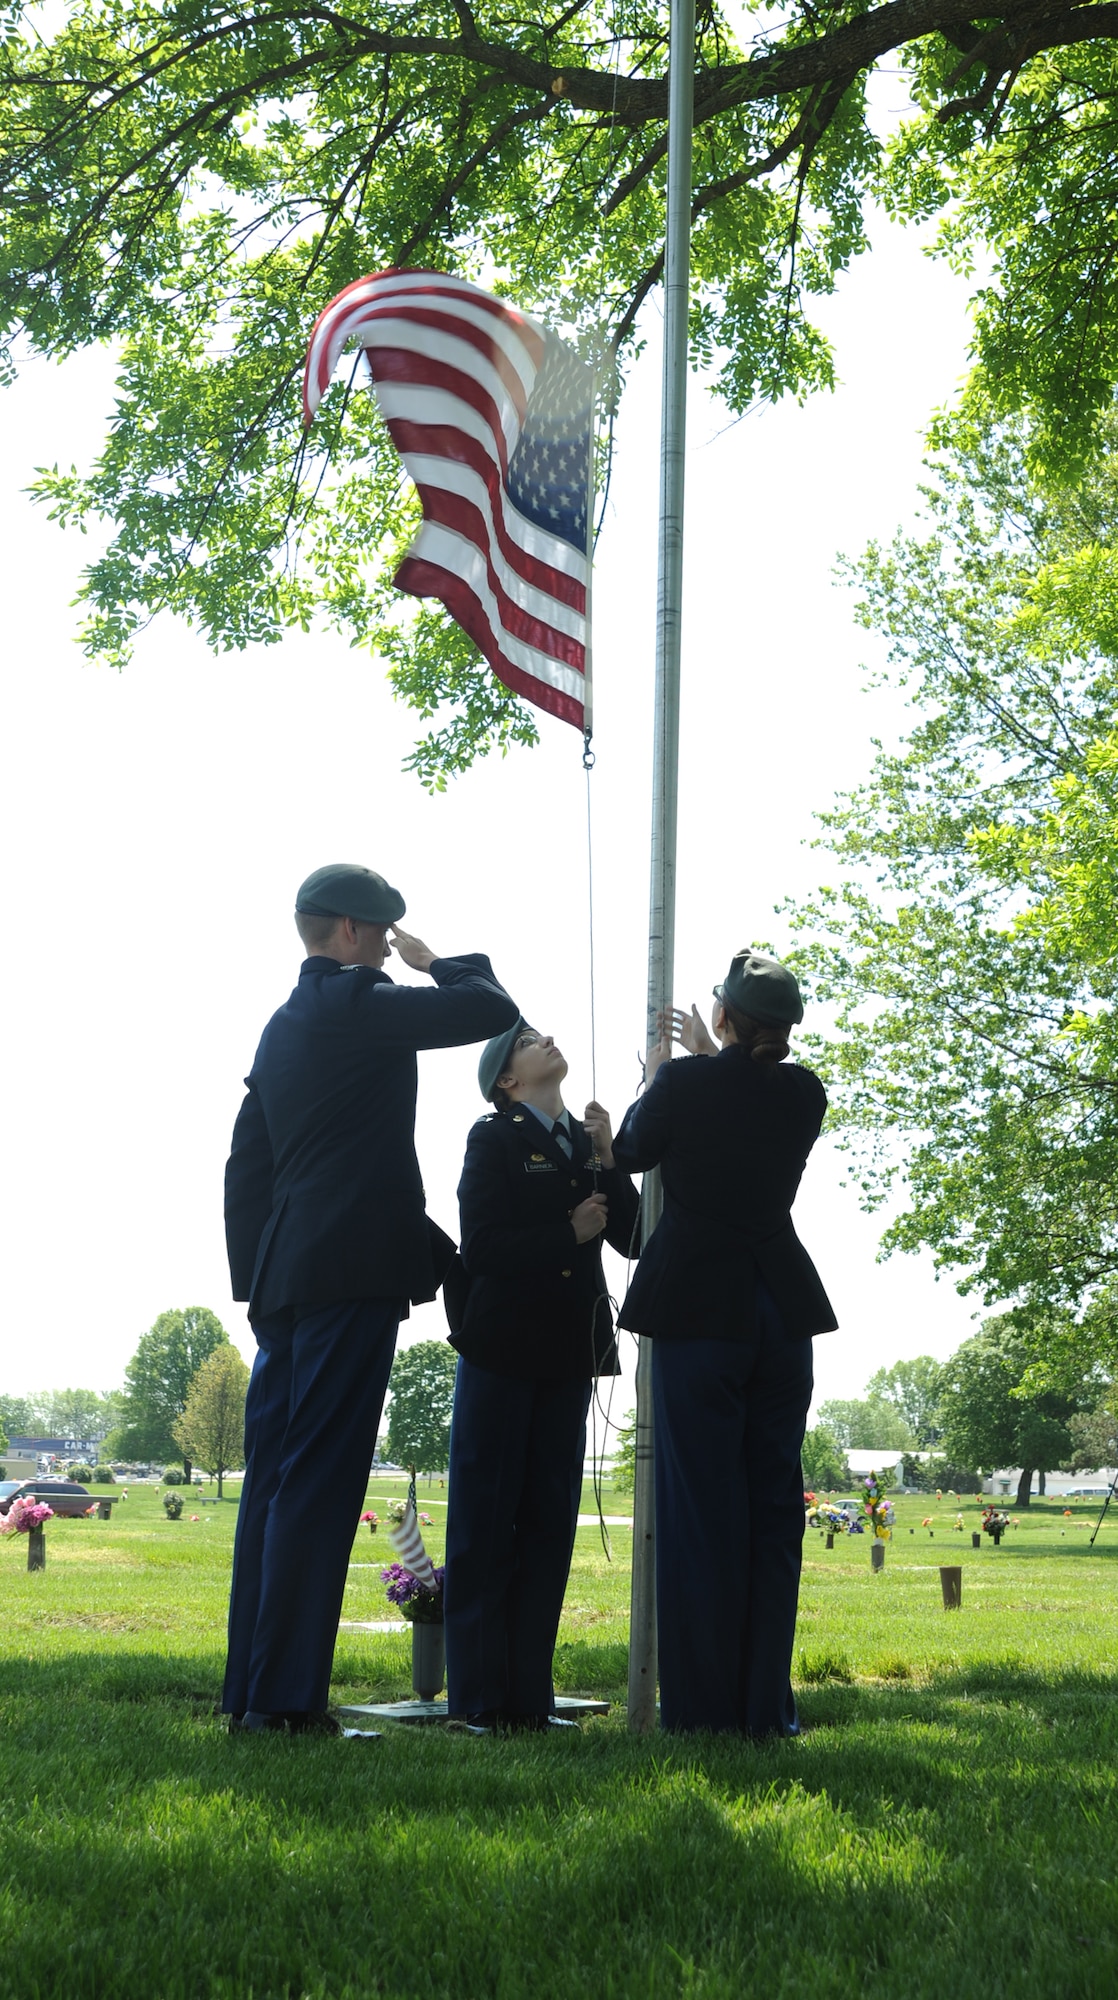 Cadets from the Sedalia Army Junior ROTC Honor Guard raise a ceremonial flag to half-staff during a wreath-laying ceremony for 2nd Lt. George Whiteman May 18, 2013, in Sedalia, Mo. The cadets are also from Smith-Cotton High School, where Whiteman graduated from before enlisting in the Air Force. (U.S. Air Force photo by Senior Airman Brigitte N. Brantley/Released)